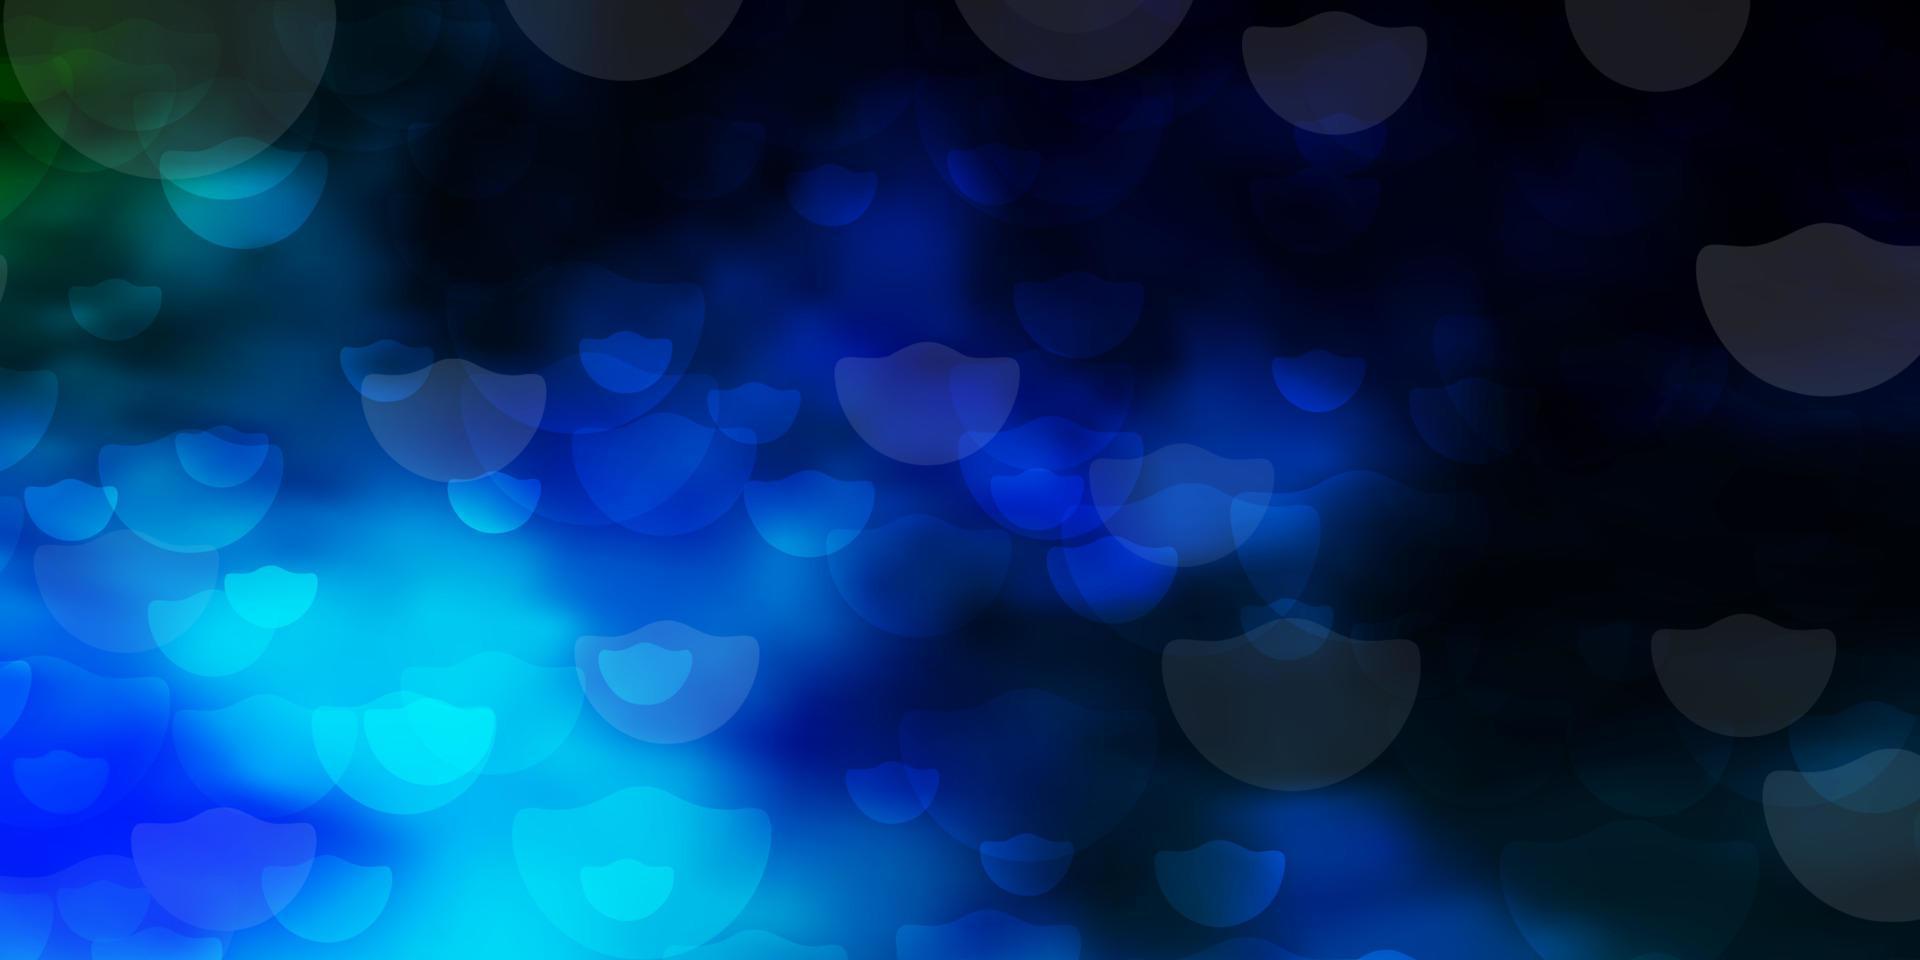 Dark Blue, Green vector background with circles.